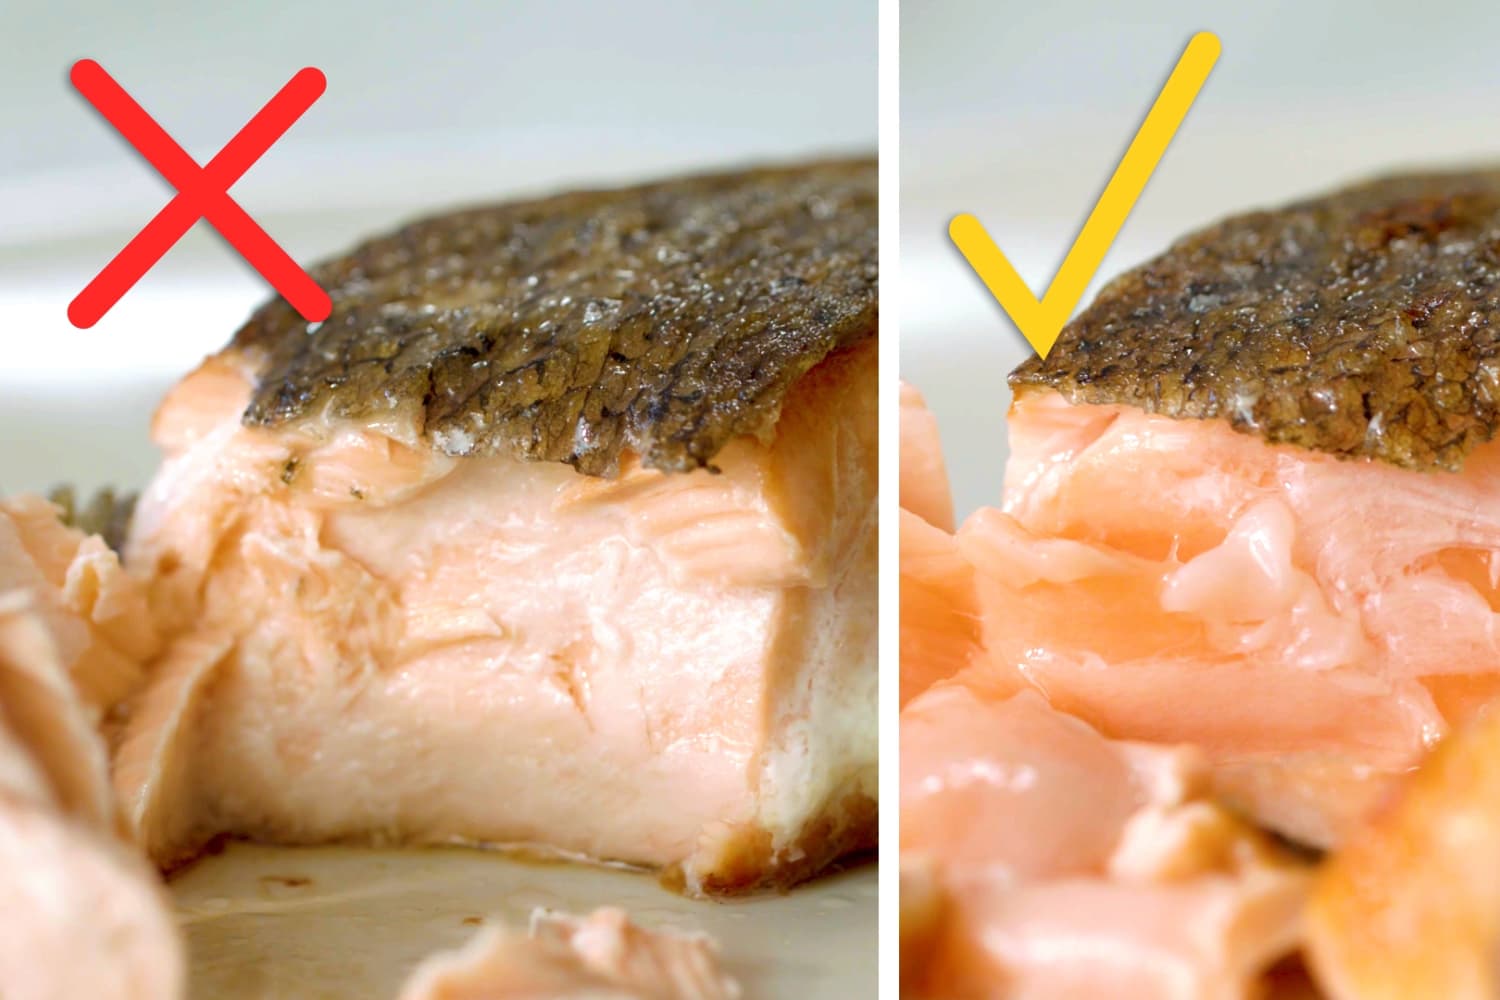 How Do You Know If Cooked Fish Is Spoiled: Signs To Watch For